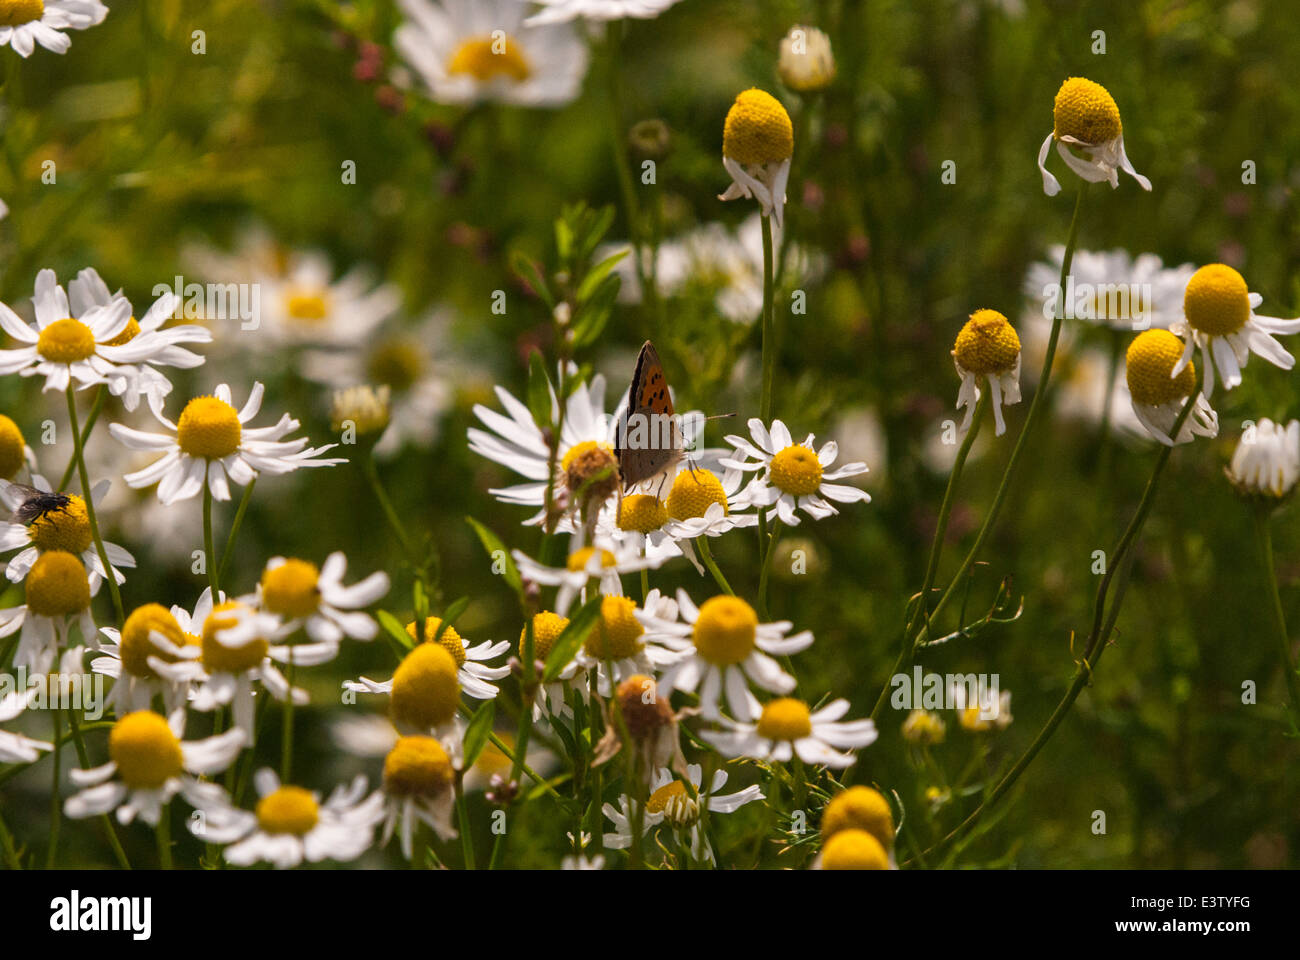 A Small Copper butterfly, Lycaena phlaeas, feeding on a daisy, Bellis perennis Stock Photo